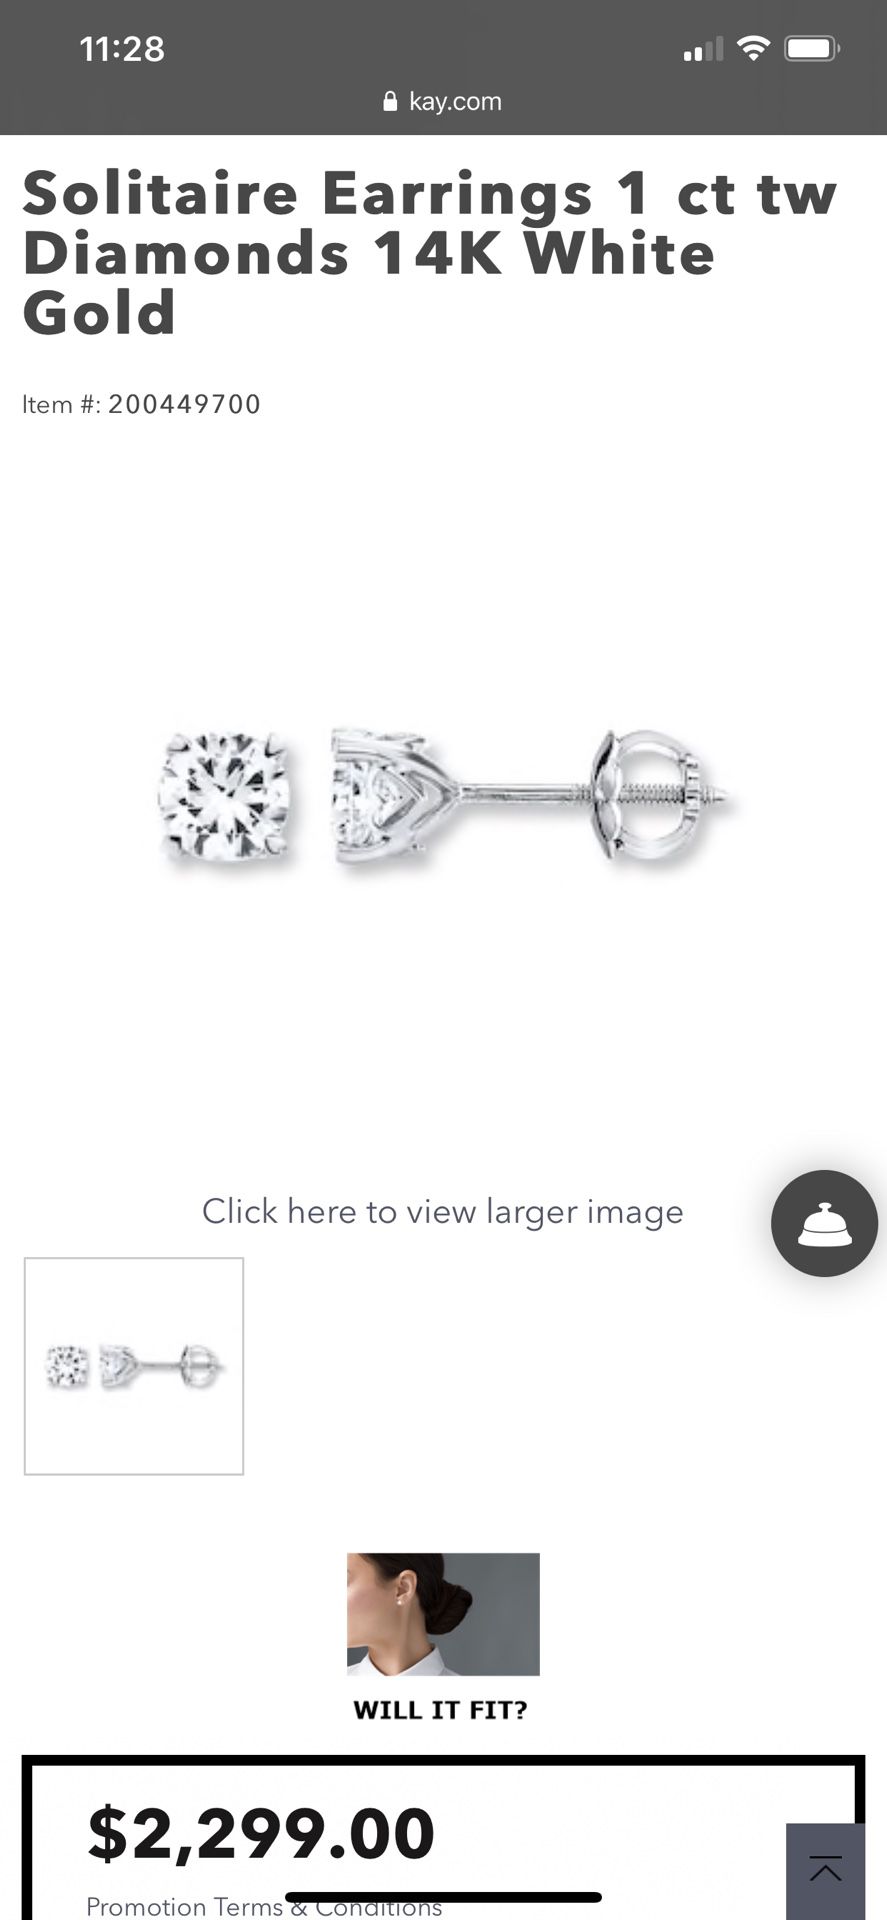 Solitaire Earrings 1 ct tw Diamonds 14K White Gold $700